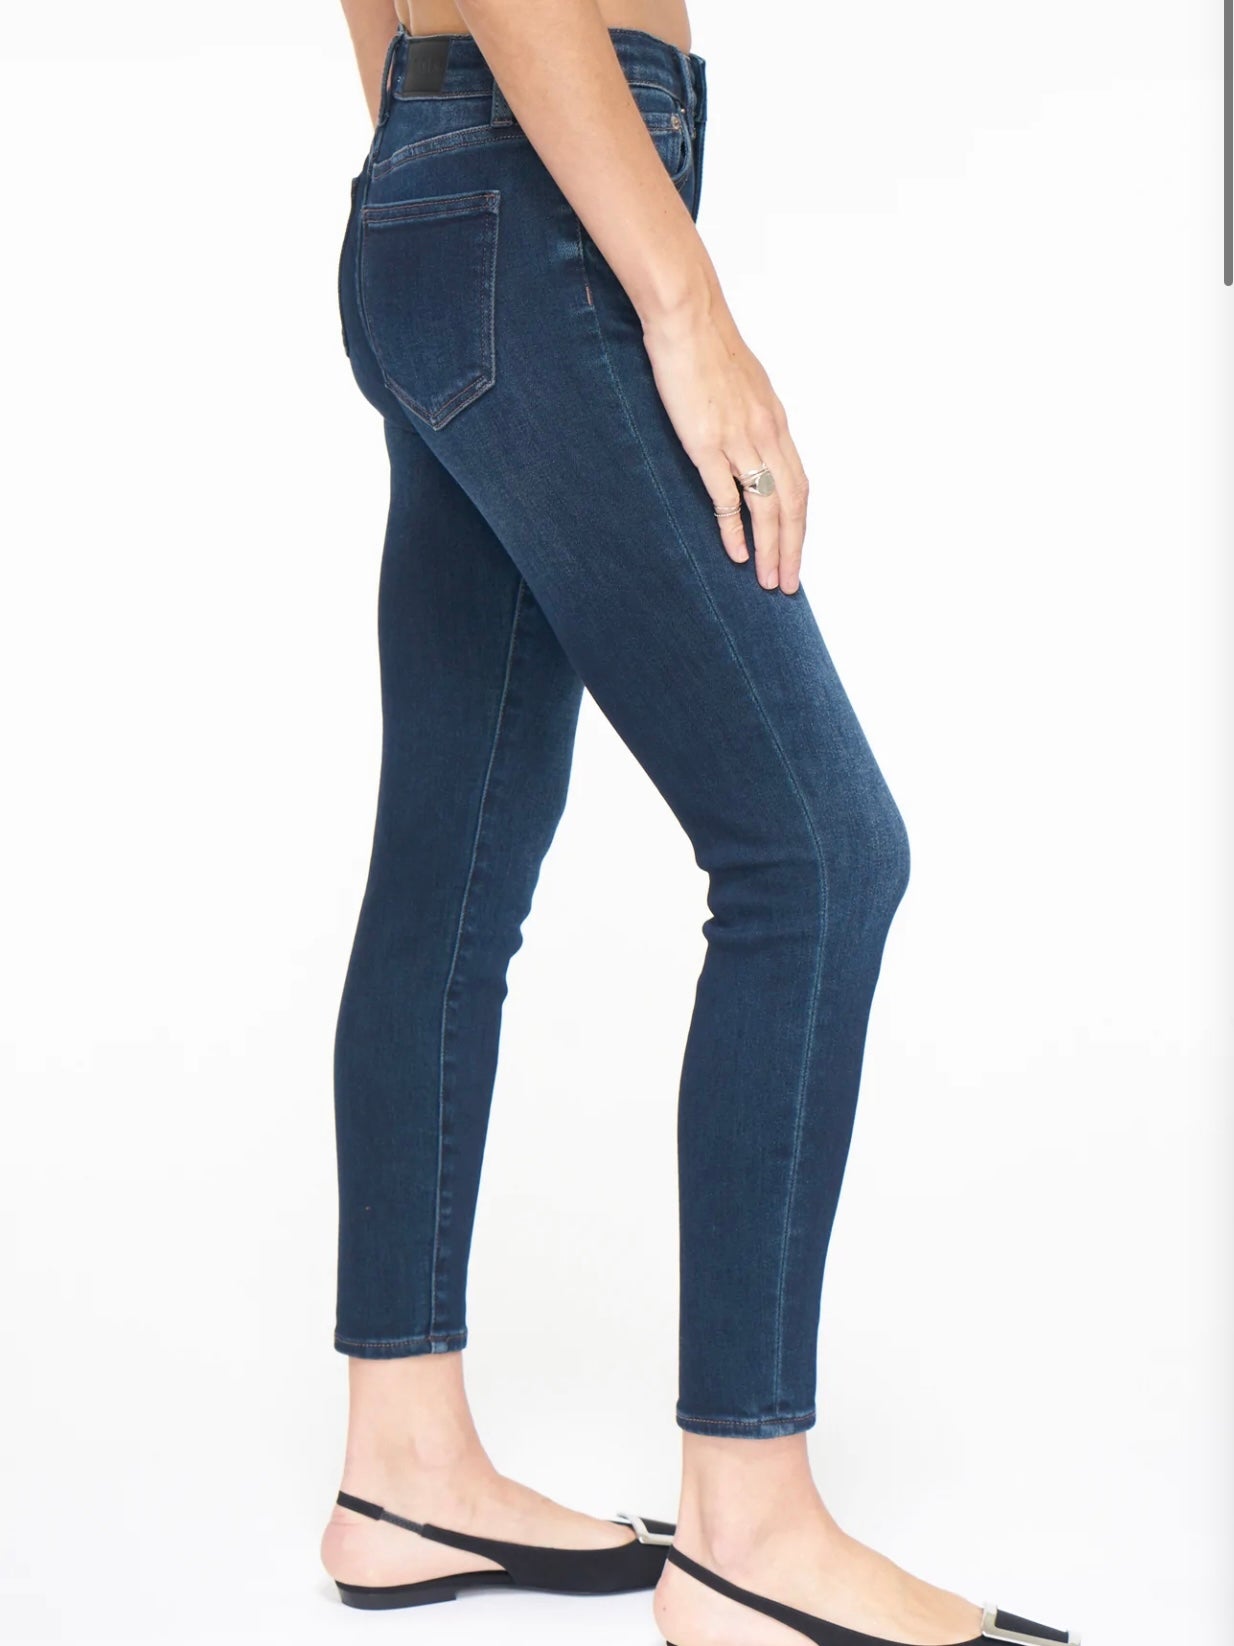 Pistola Audrey Mid Rise Skinny in Liberty